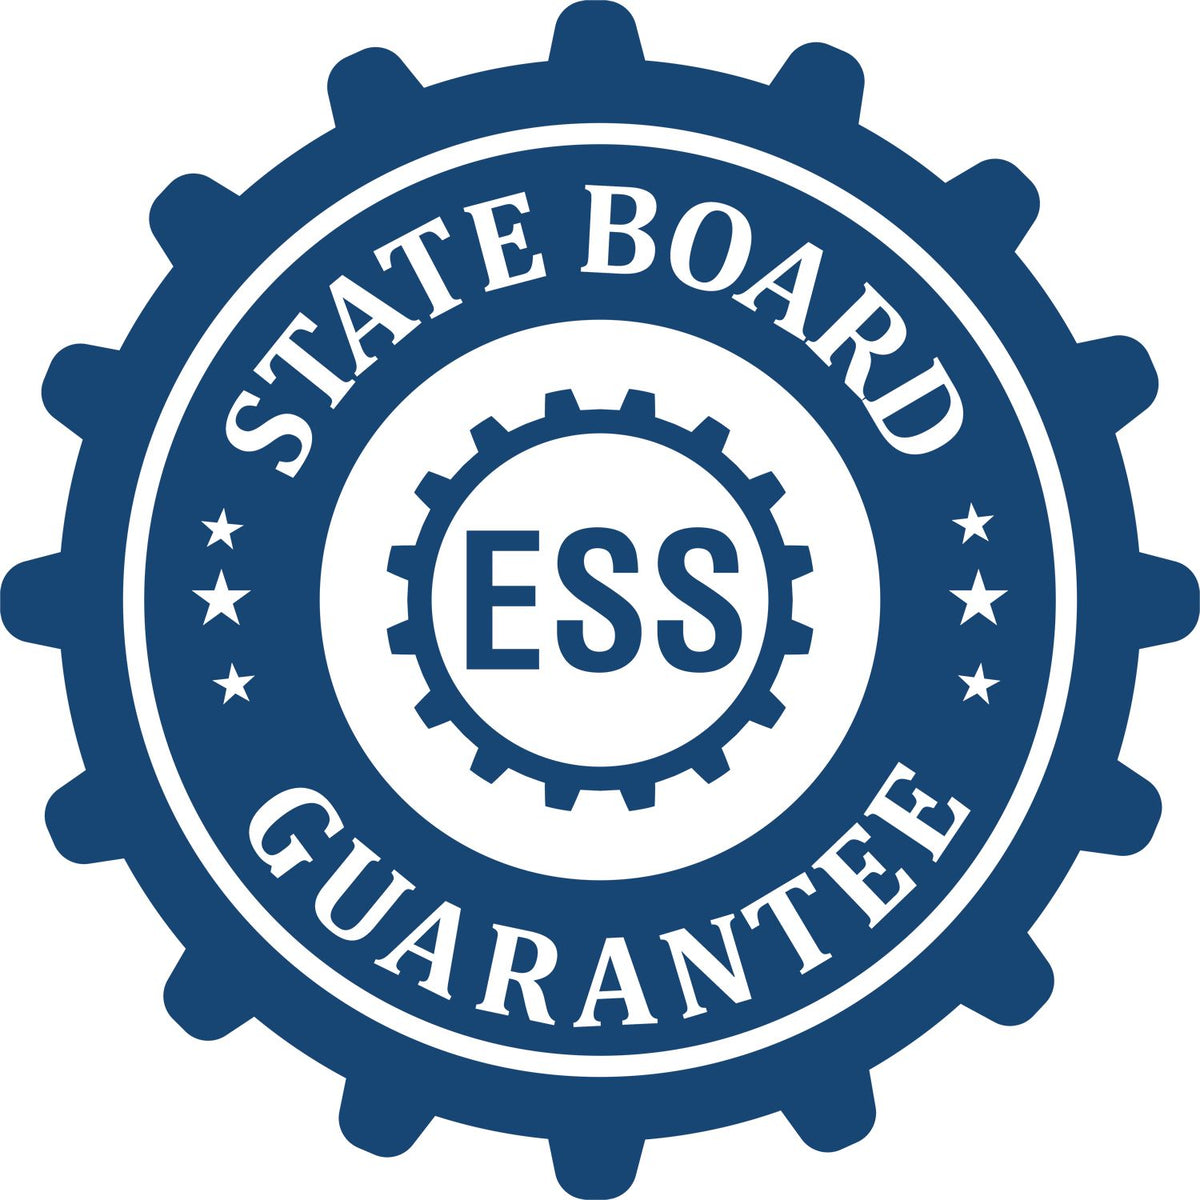 An emblem in a gear shape illustrating a state board guarantee for the Wooden Handle Puerto Rico Rectangular Notary Public Stamp product.